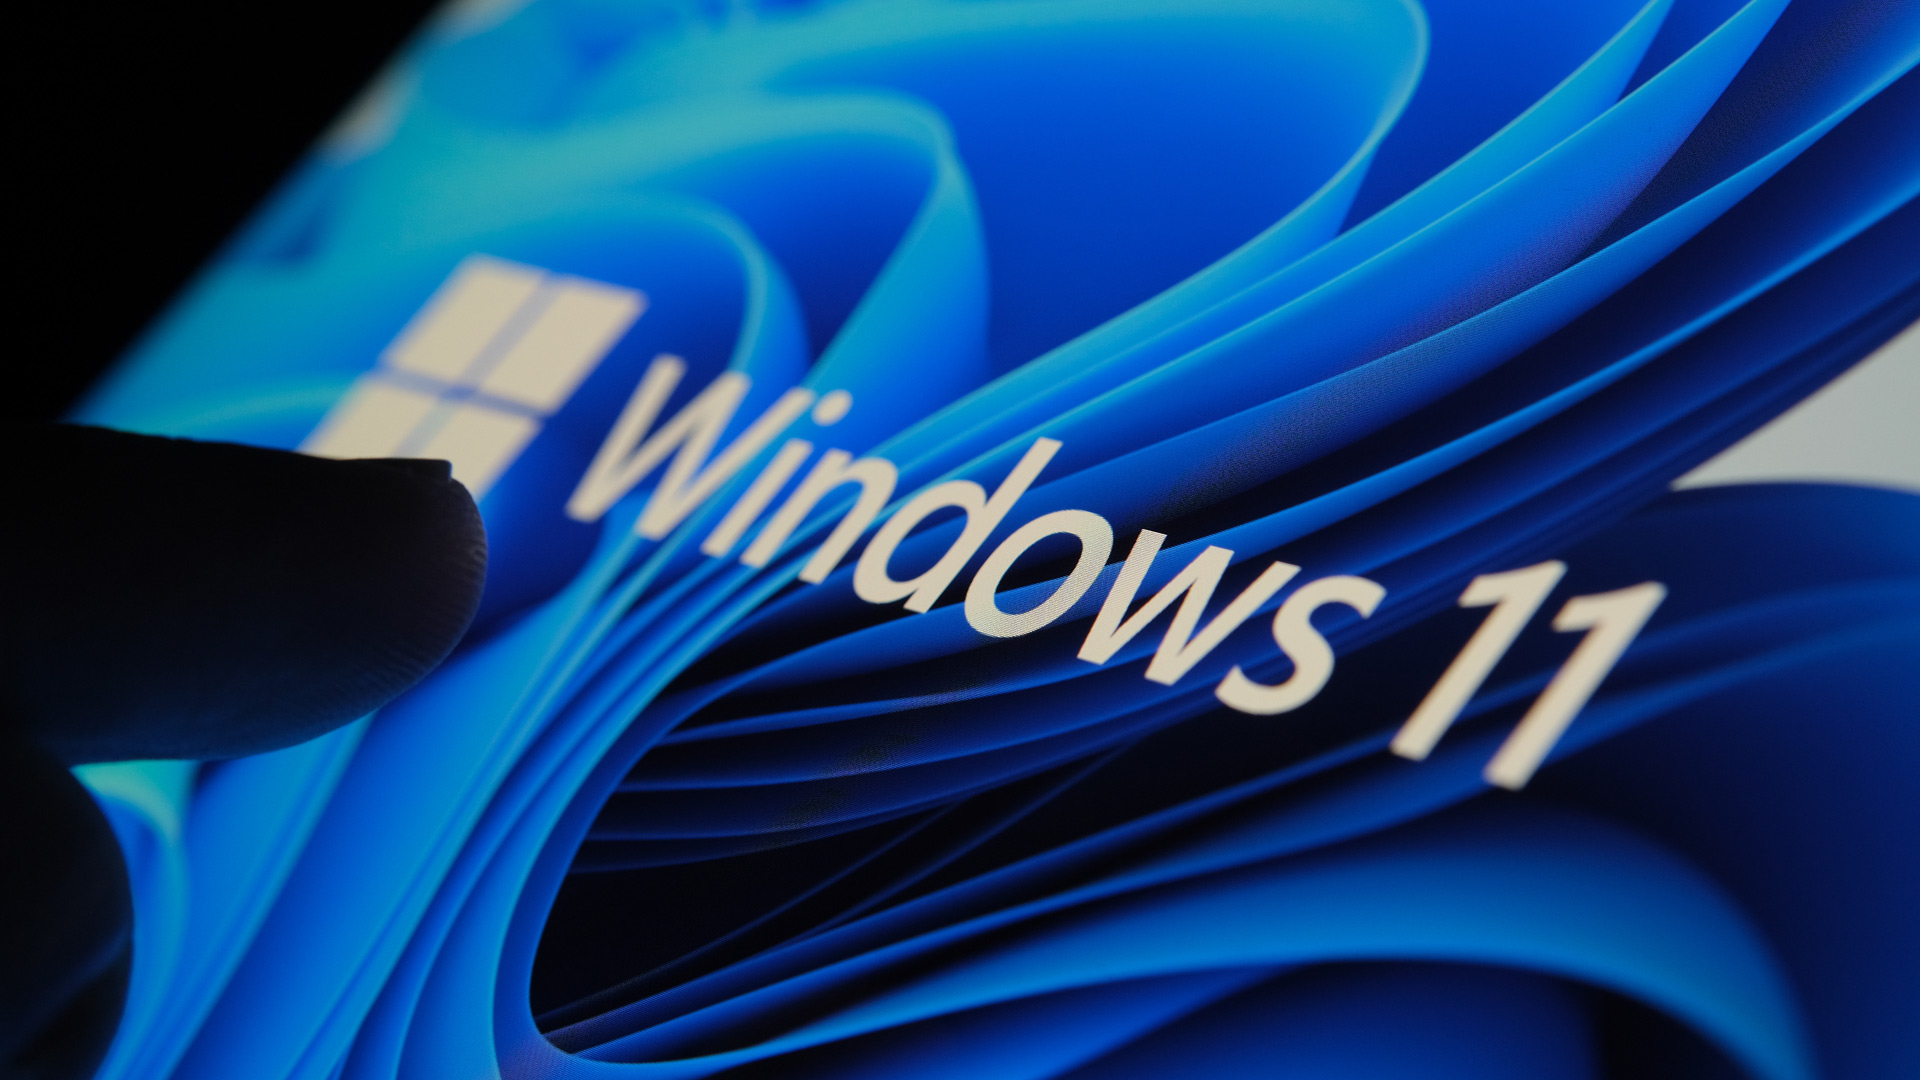 Huge Windows 11 update is finally done, but release date remains a mystery